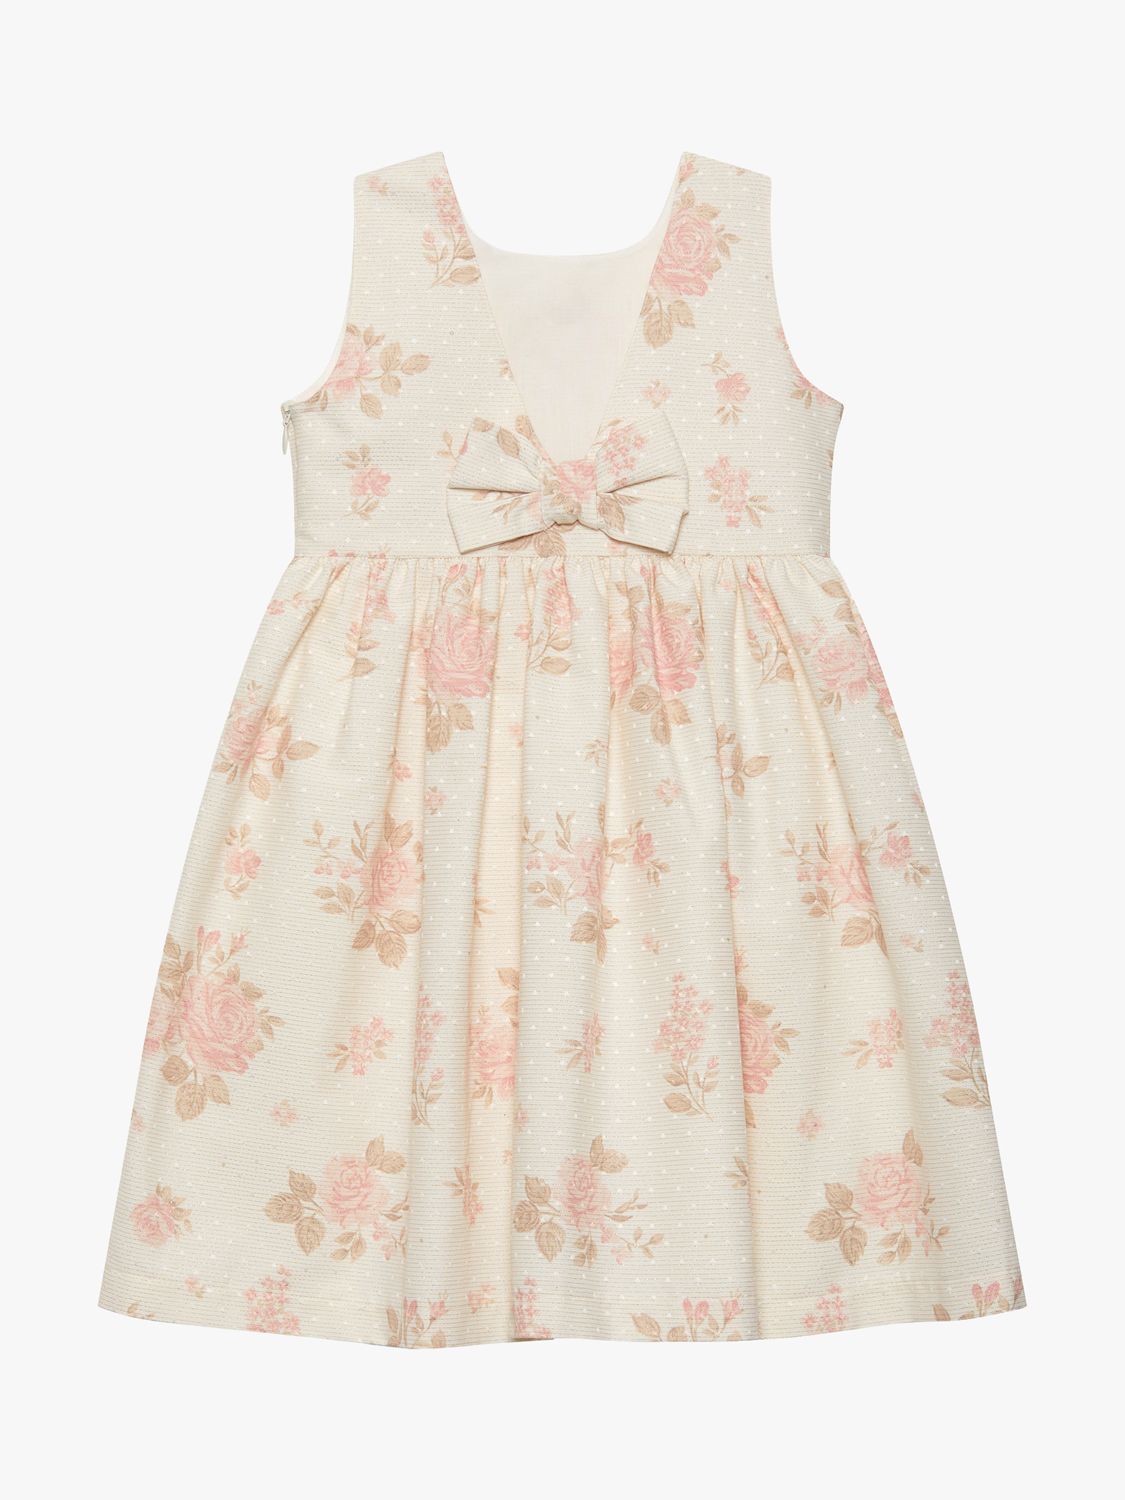 Trotters Kids' Maeva Floral Print Luxe Party Dress, Gold, 4 years